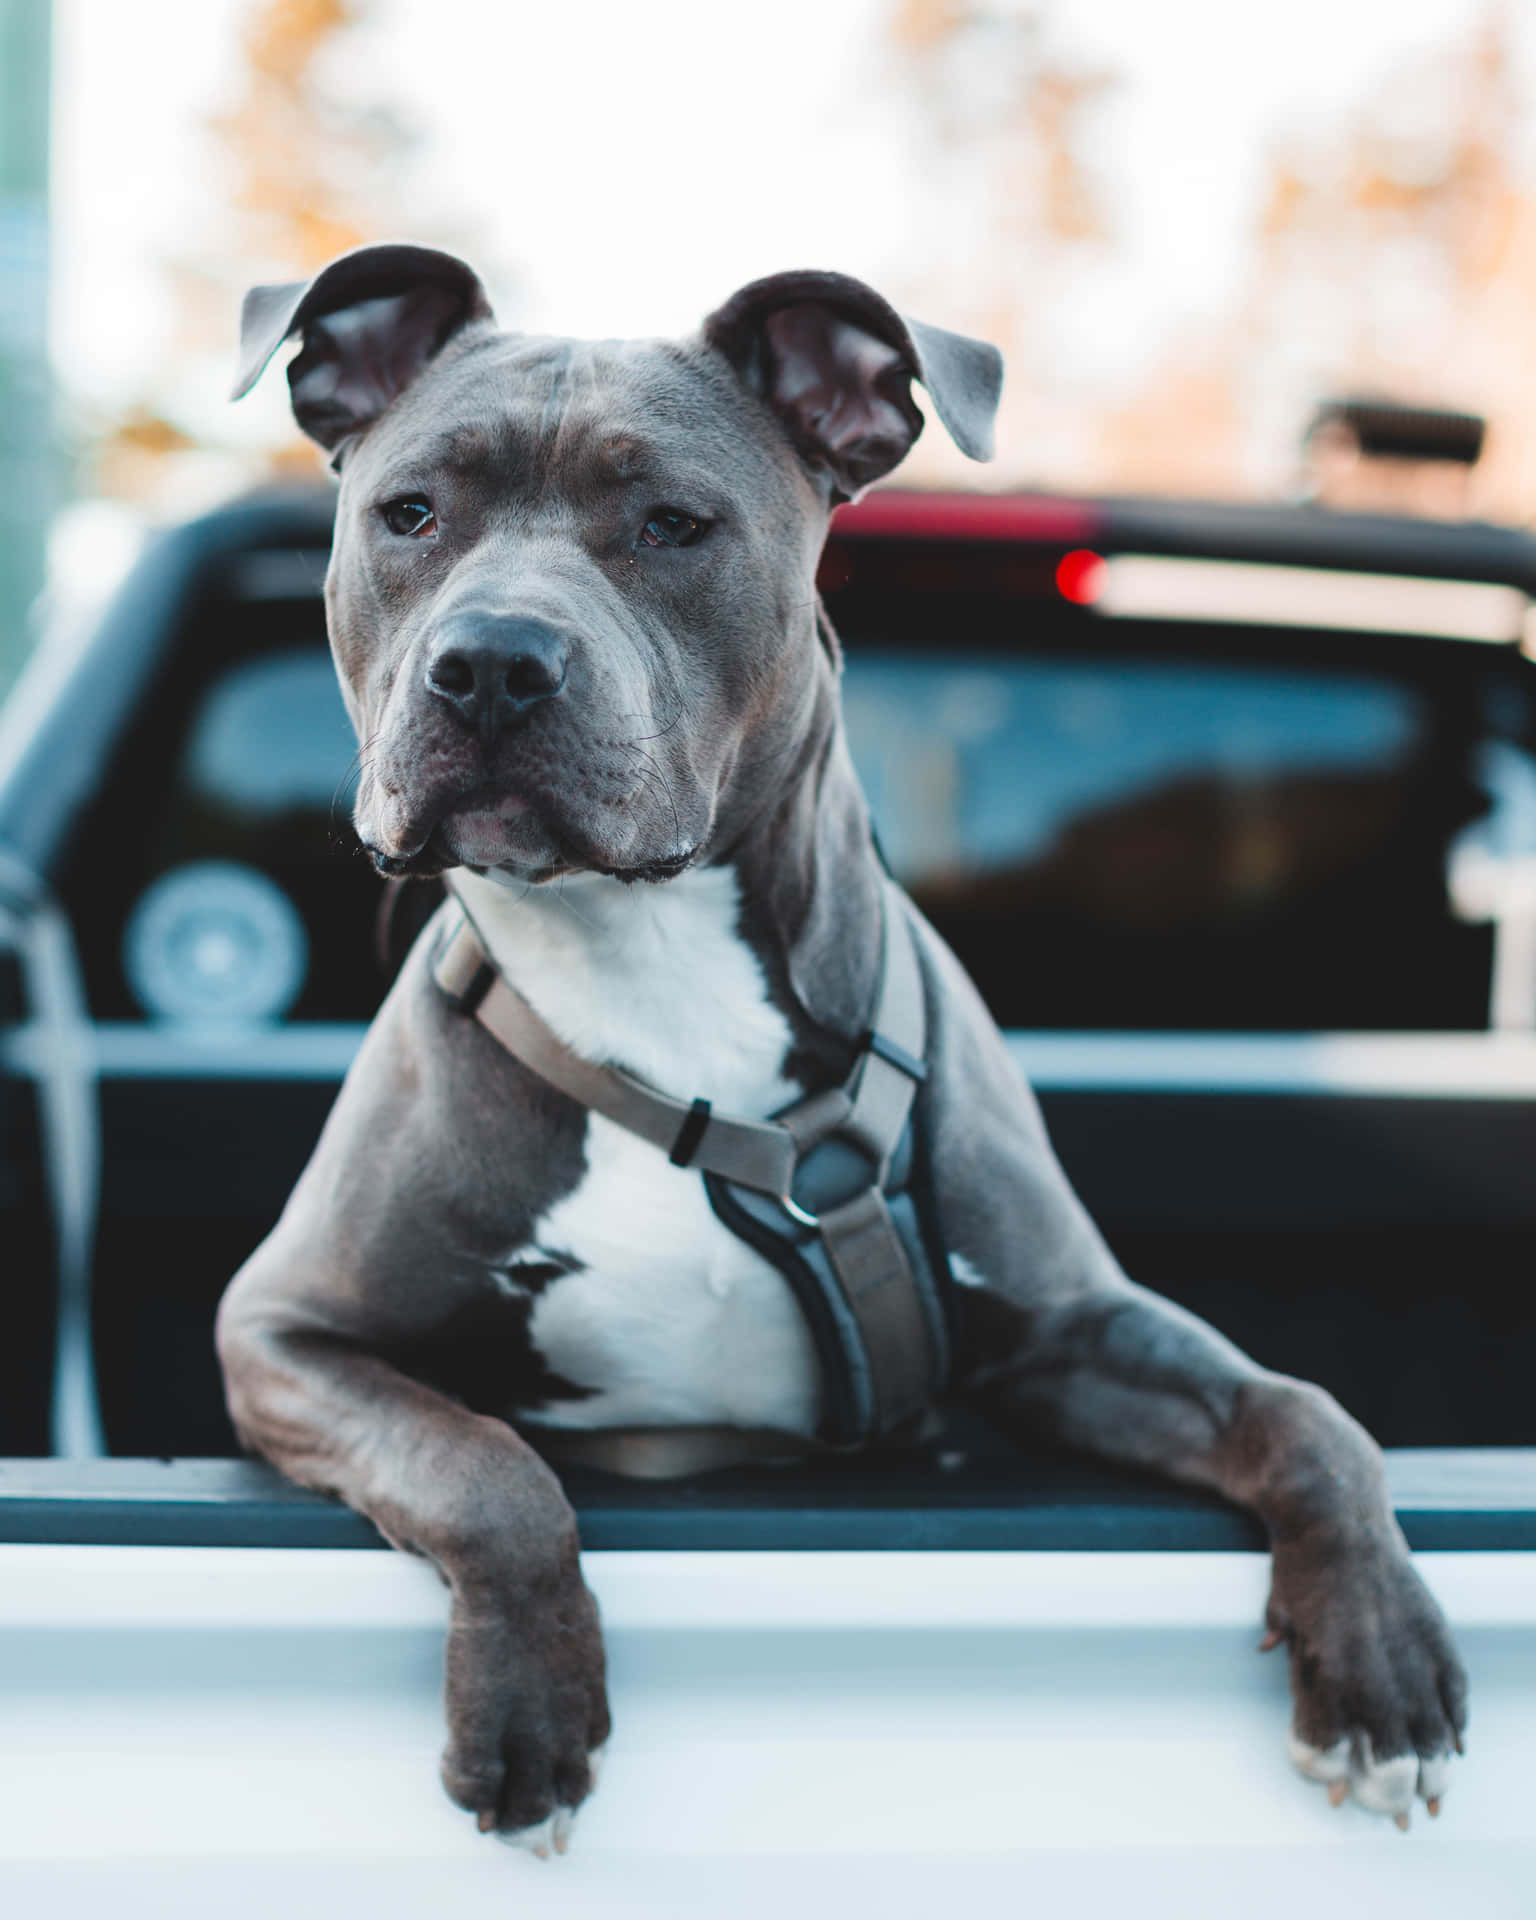 Dog Pitbull In The Back Of A Car Wallpaper